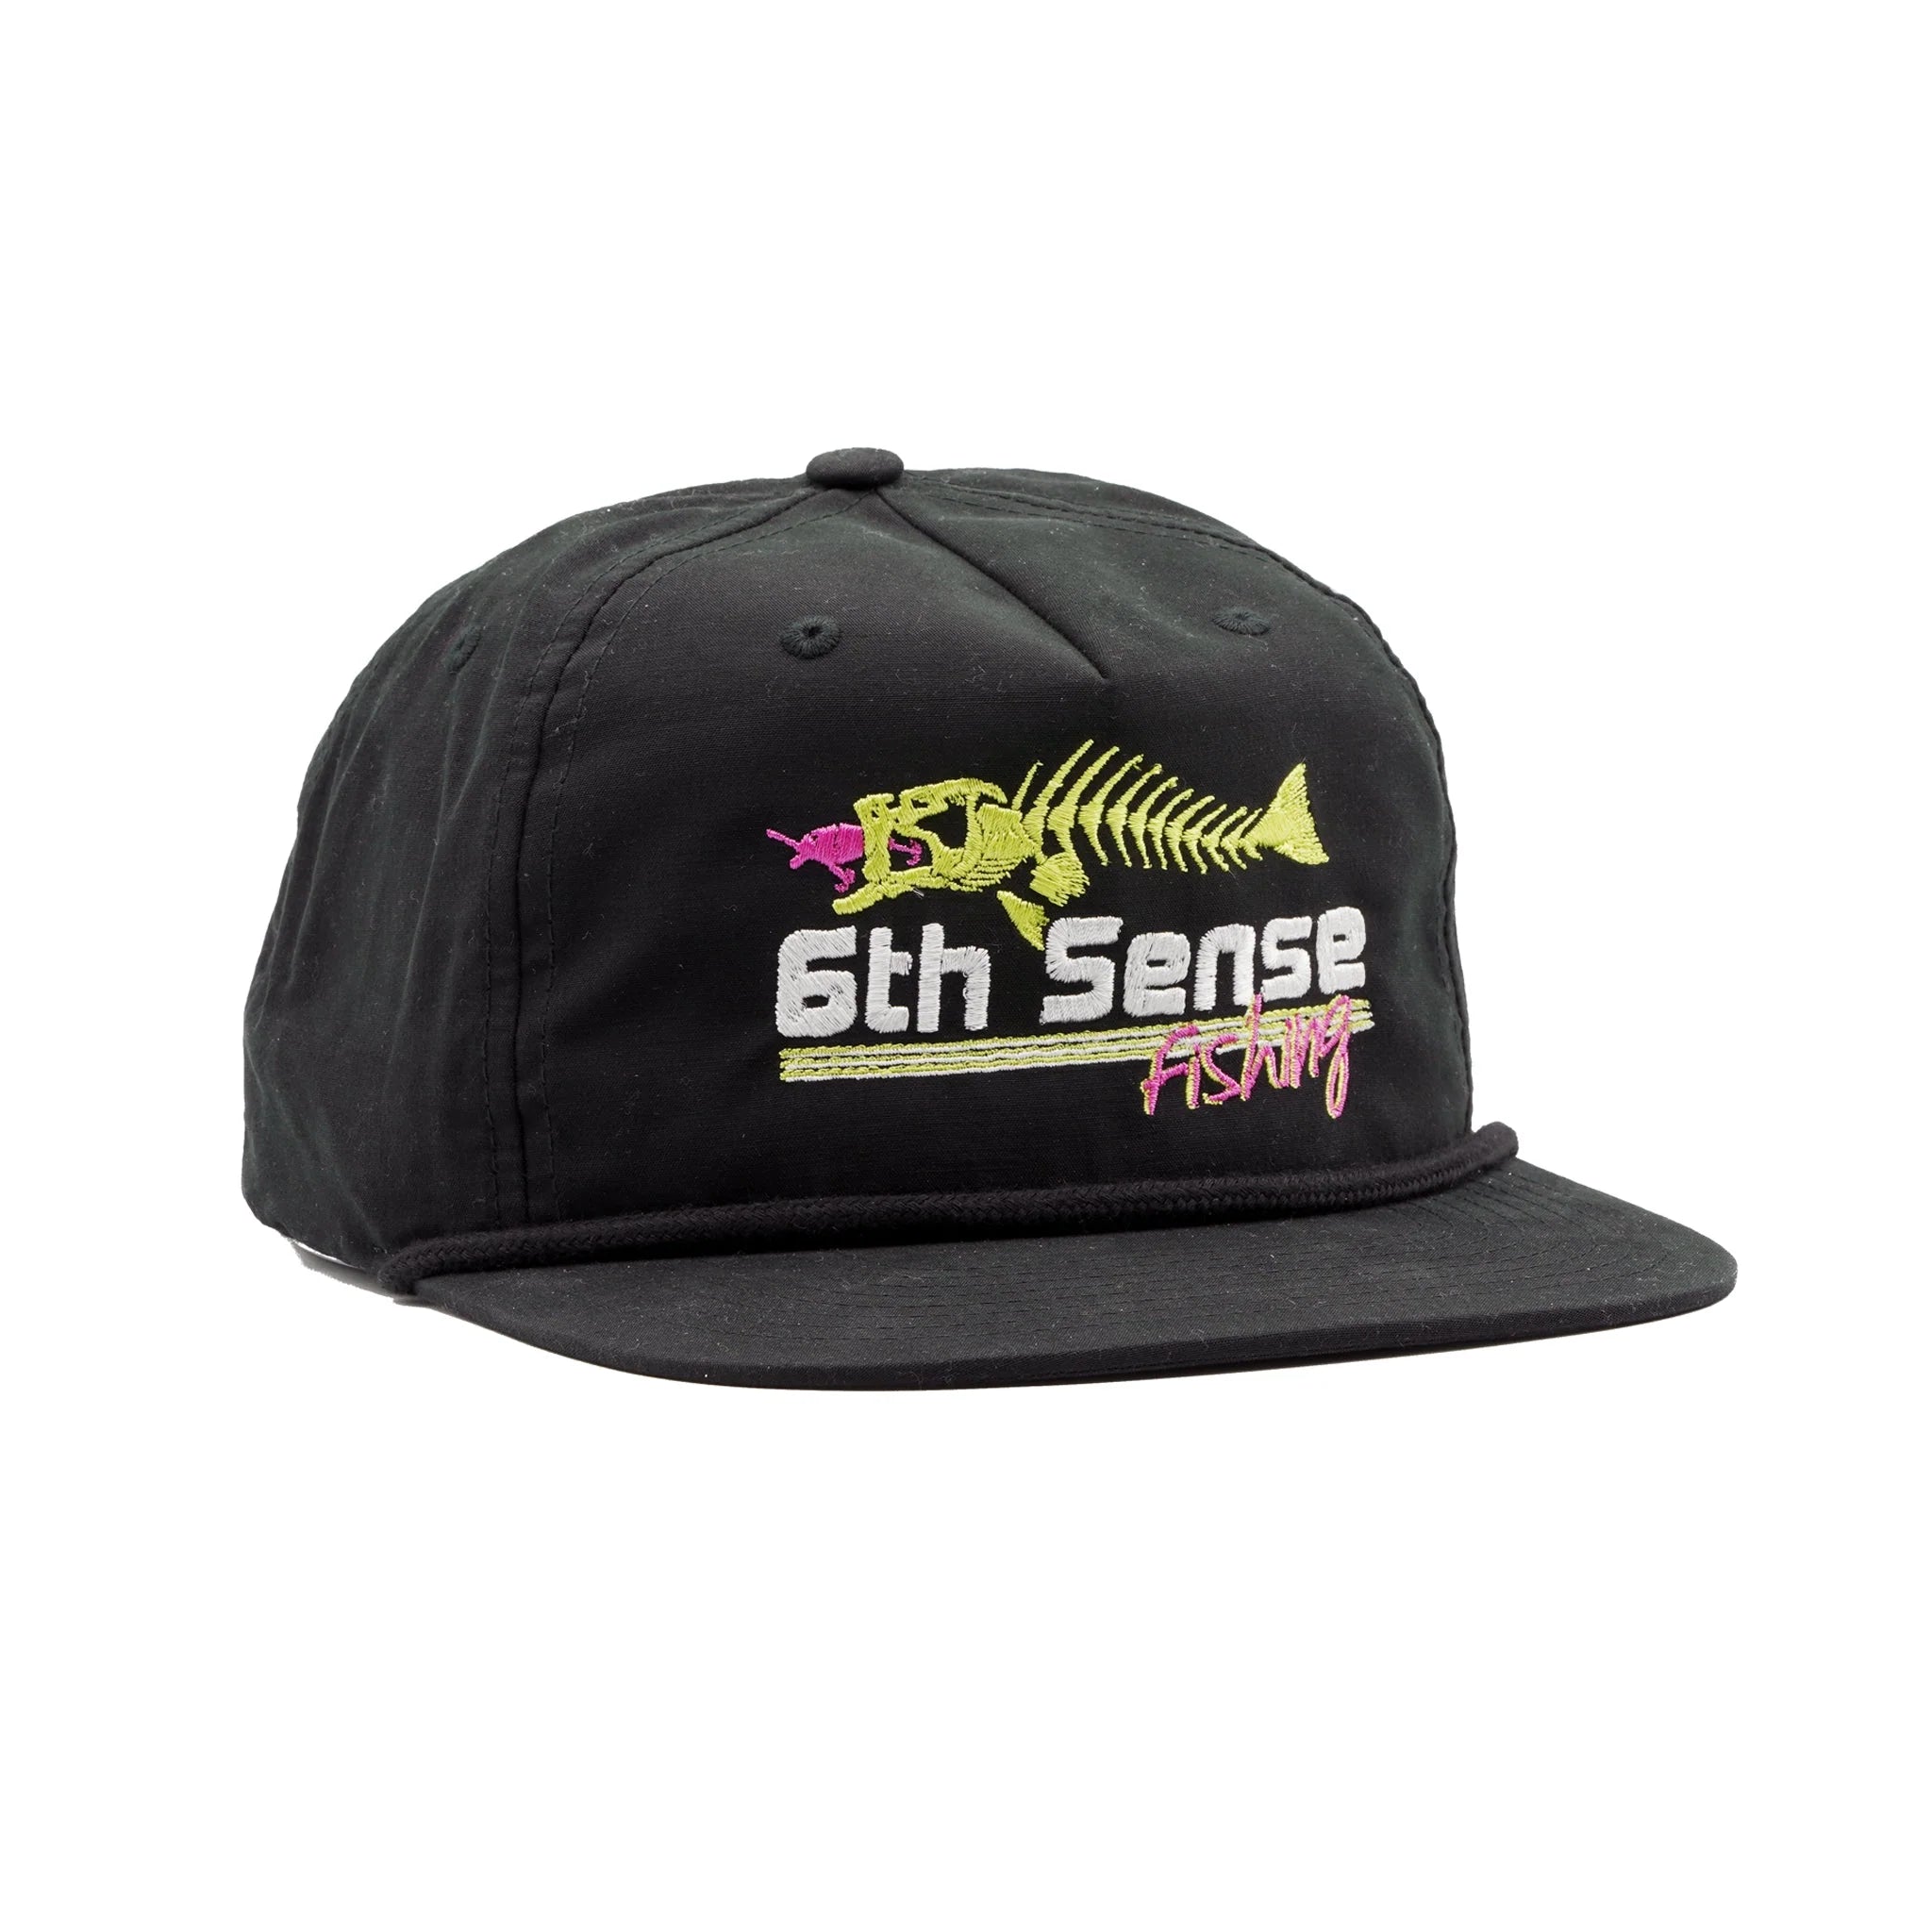 Buy old-timer-boogie-nights-limited-edition 6TH SENSE HATS